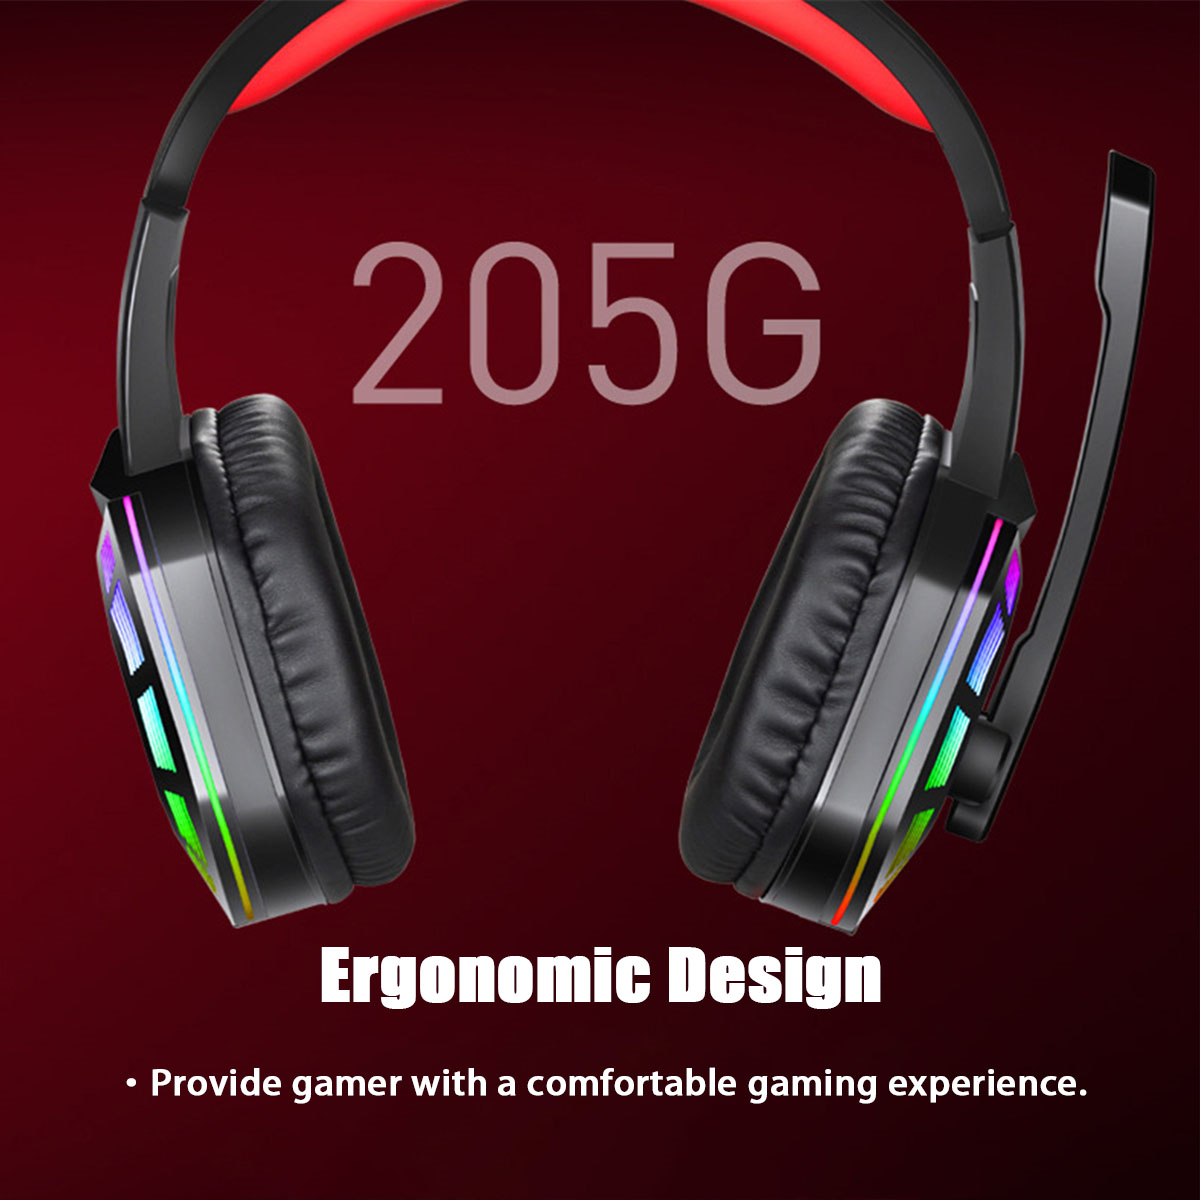 M1-Gaming-Headset-Surround-Sound-Music-Earphones-USB-71--35mm-Wired-RGB-Backlight-Game-Headphones-wi-1827492-7